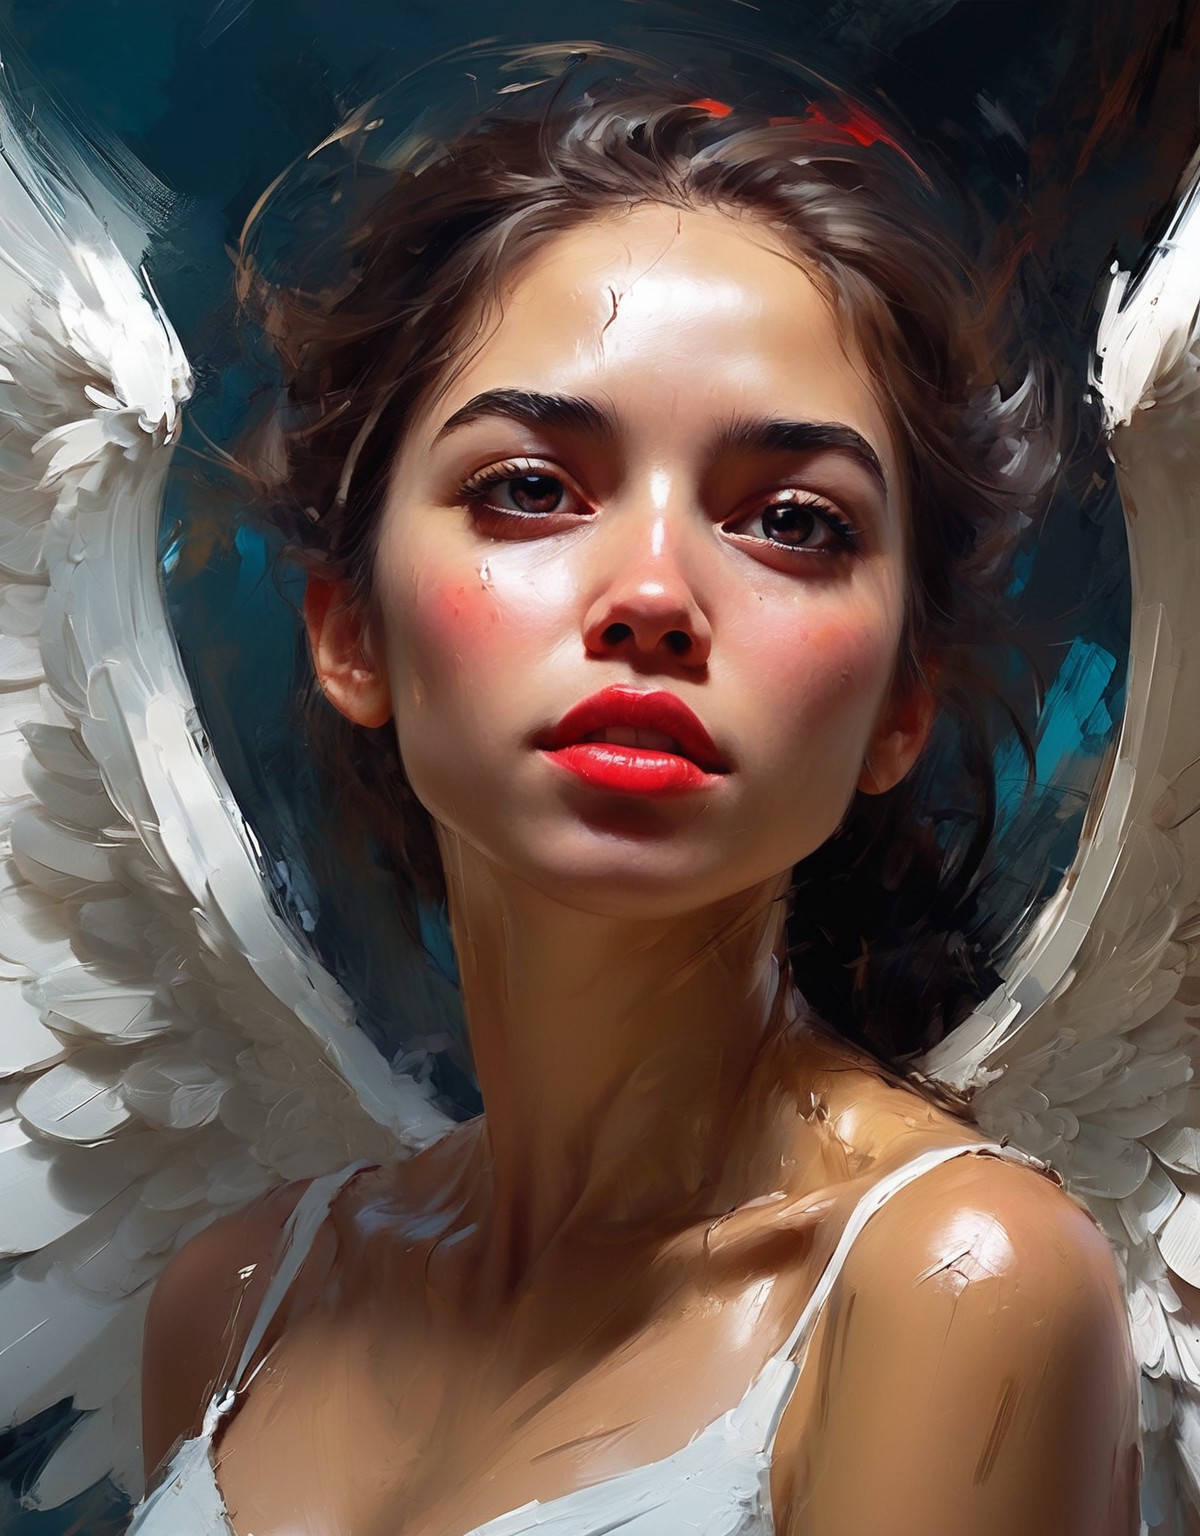 digital painting, expressive, bold brushstrokes, close-up woman as an angel style of Henry Asencio